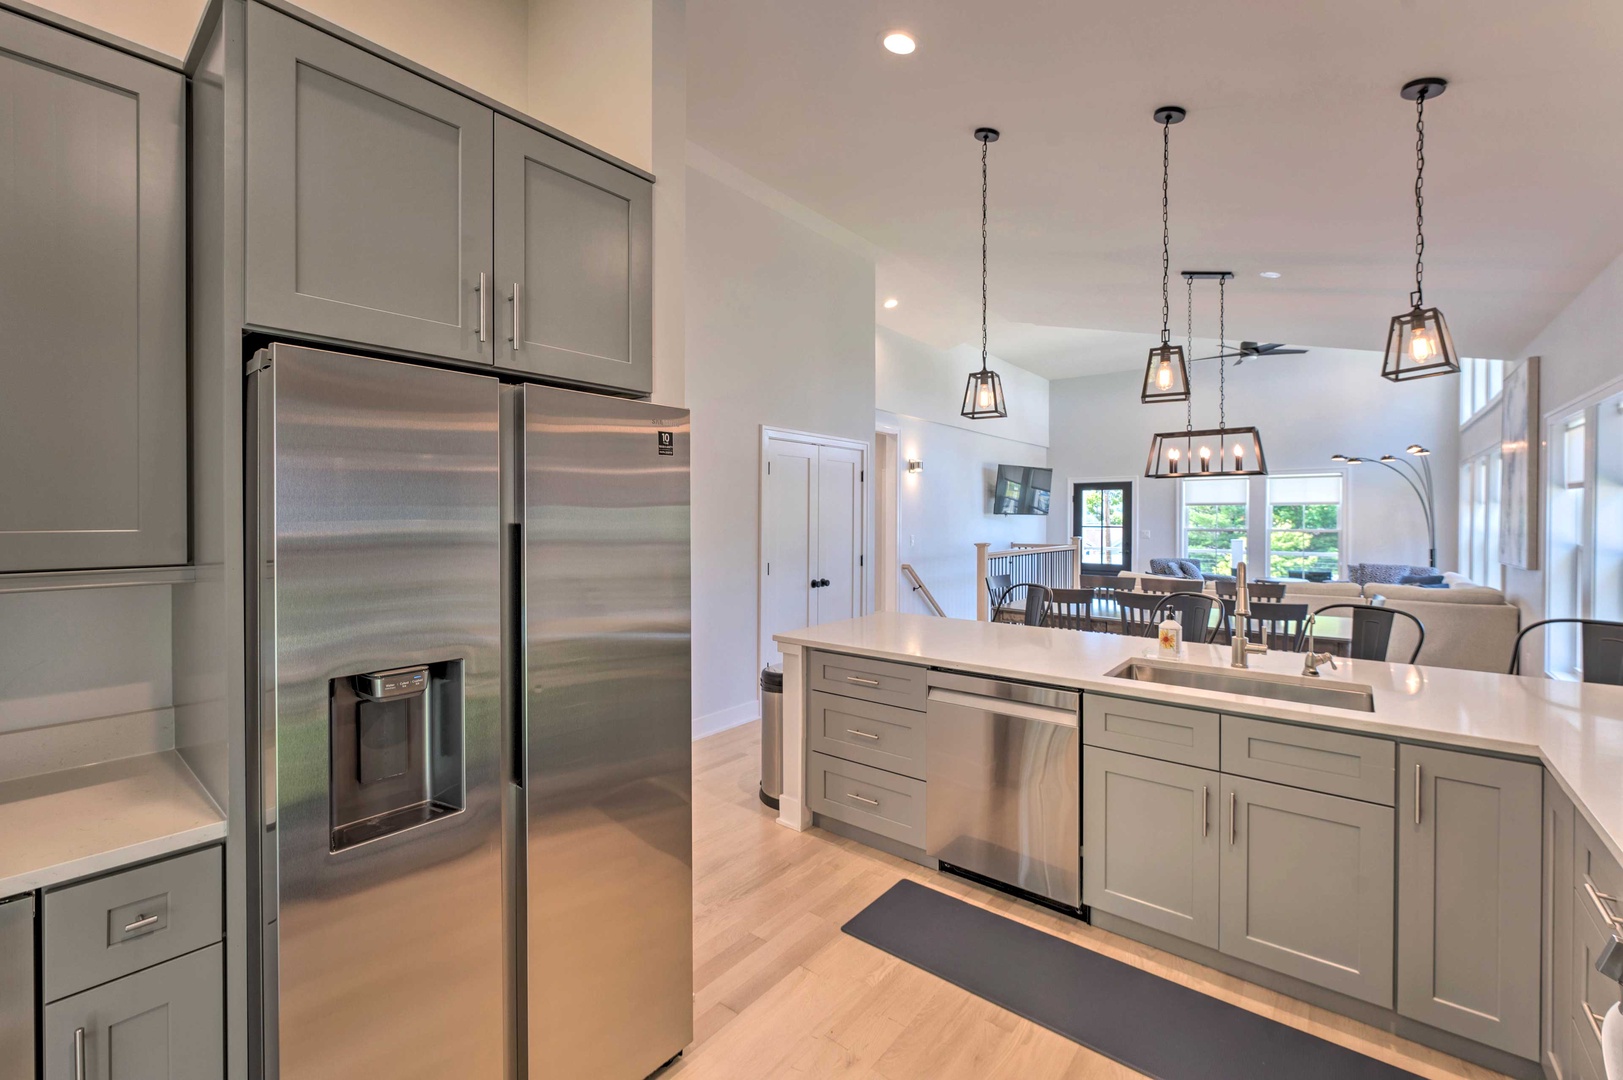 The updated kitchen is a chef’s dream, offering all the comforts of home